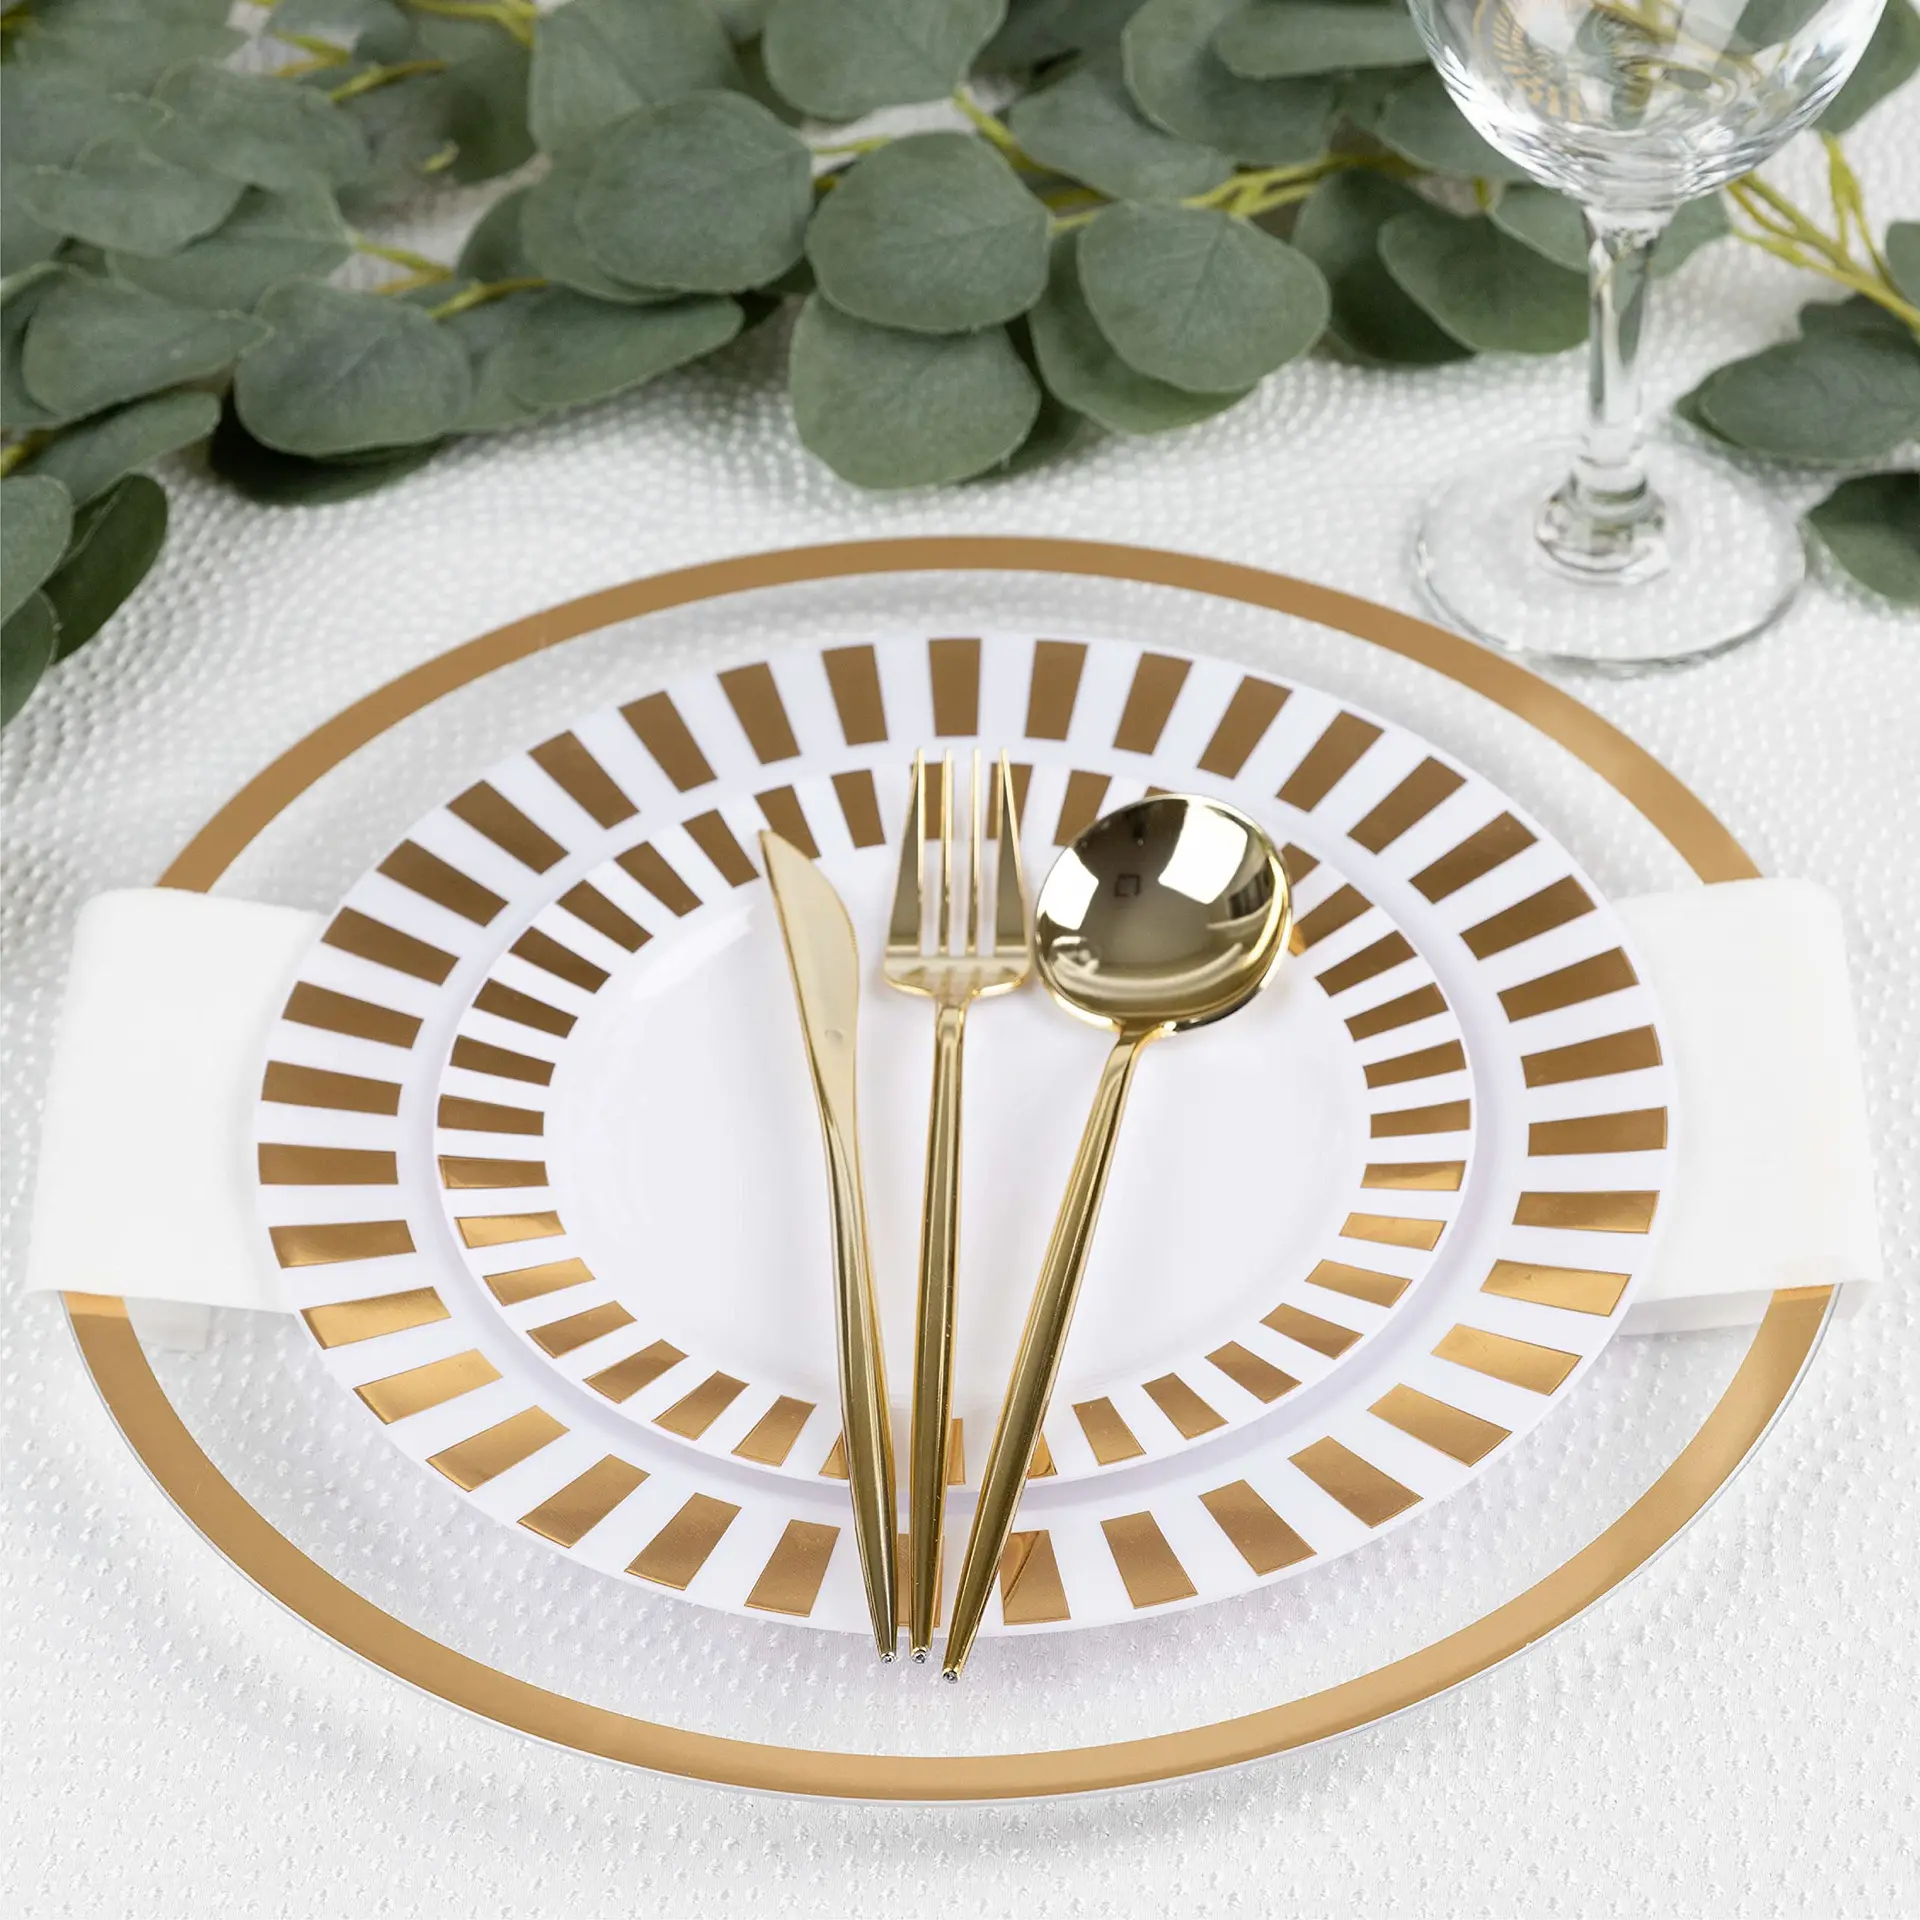 13 Inch High Quality Clear Gold Rim Disposable Plastic Plates Sets Dinnerware Party Wedding Decoration Charger Plates